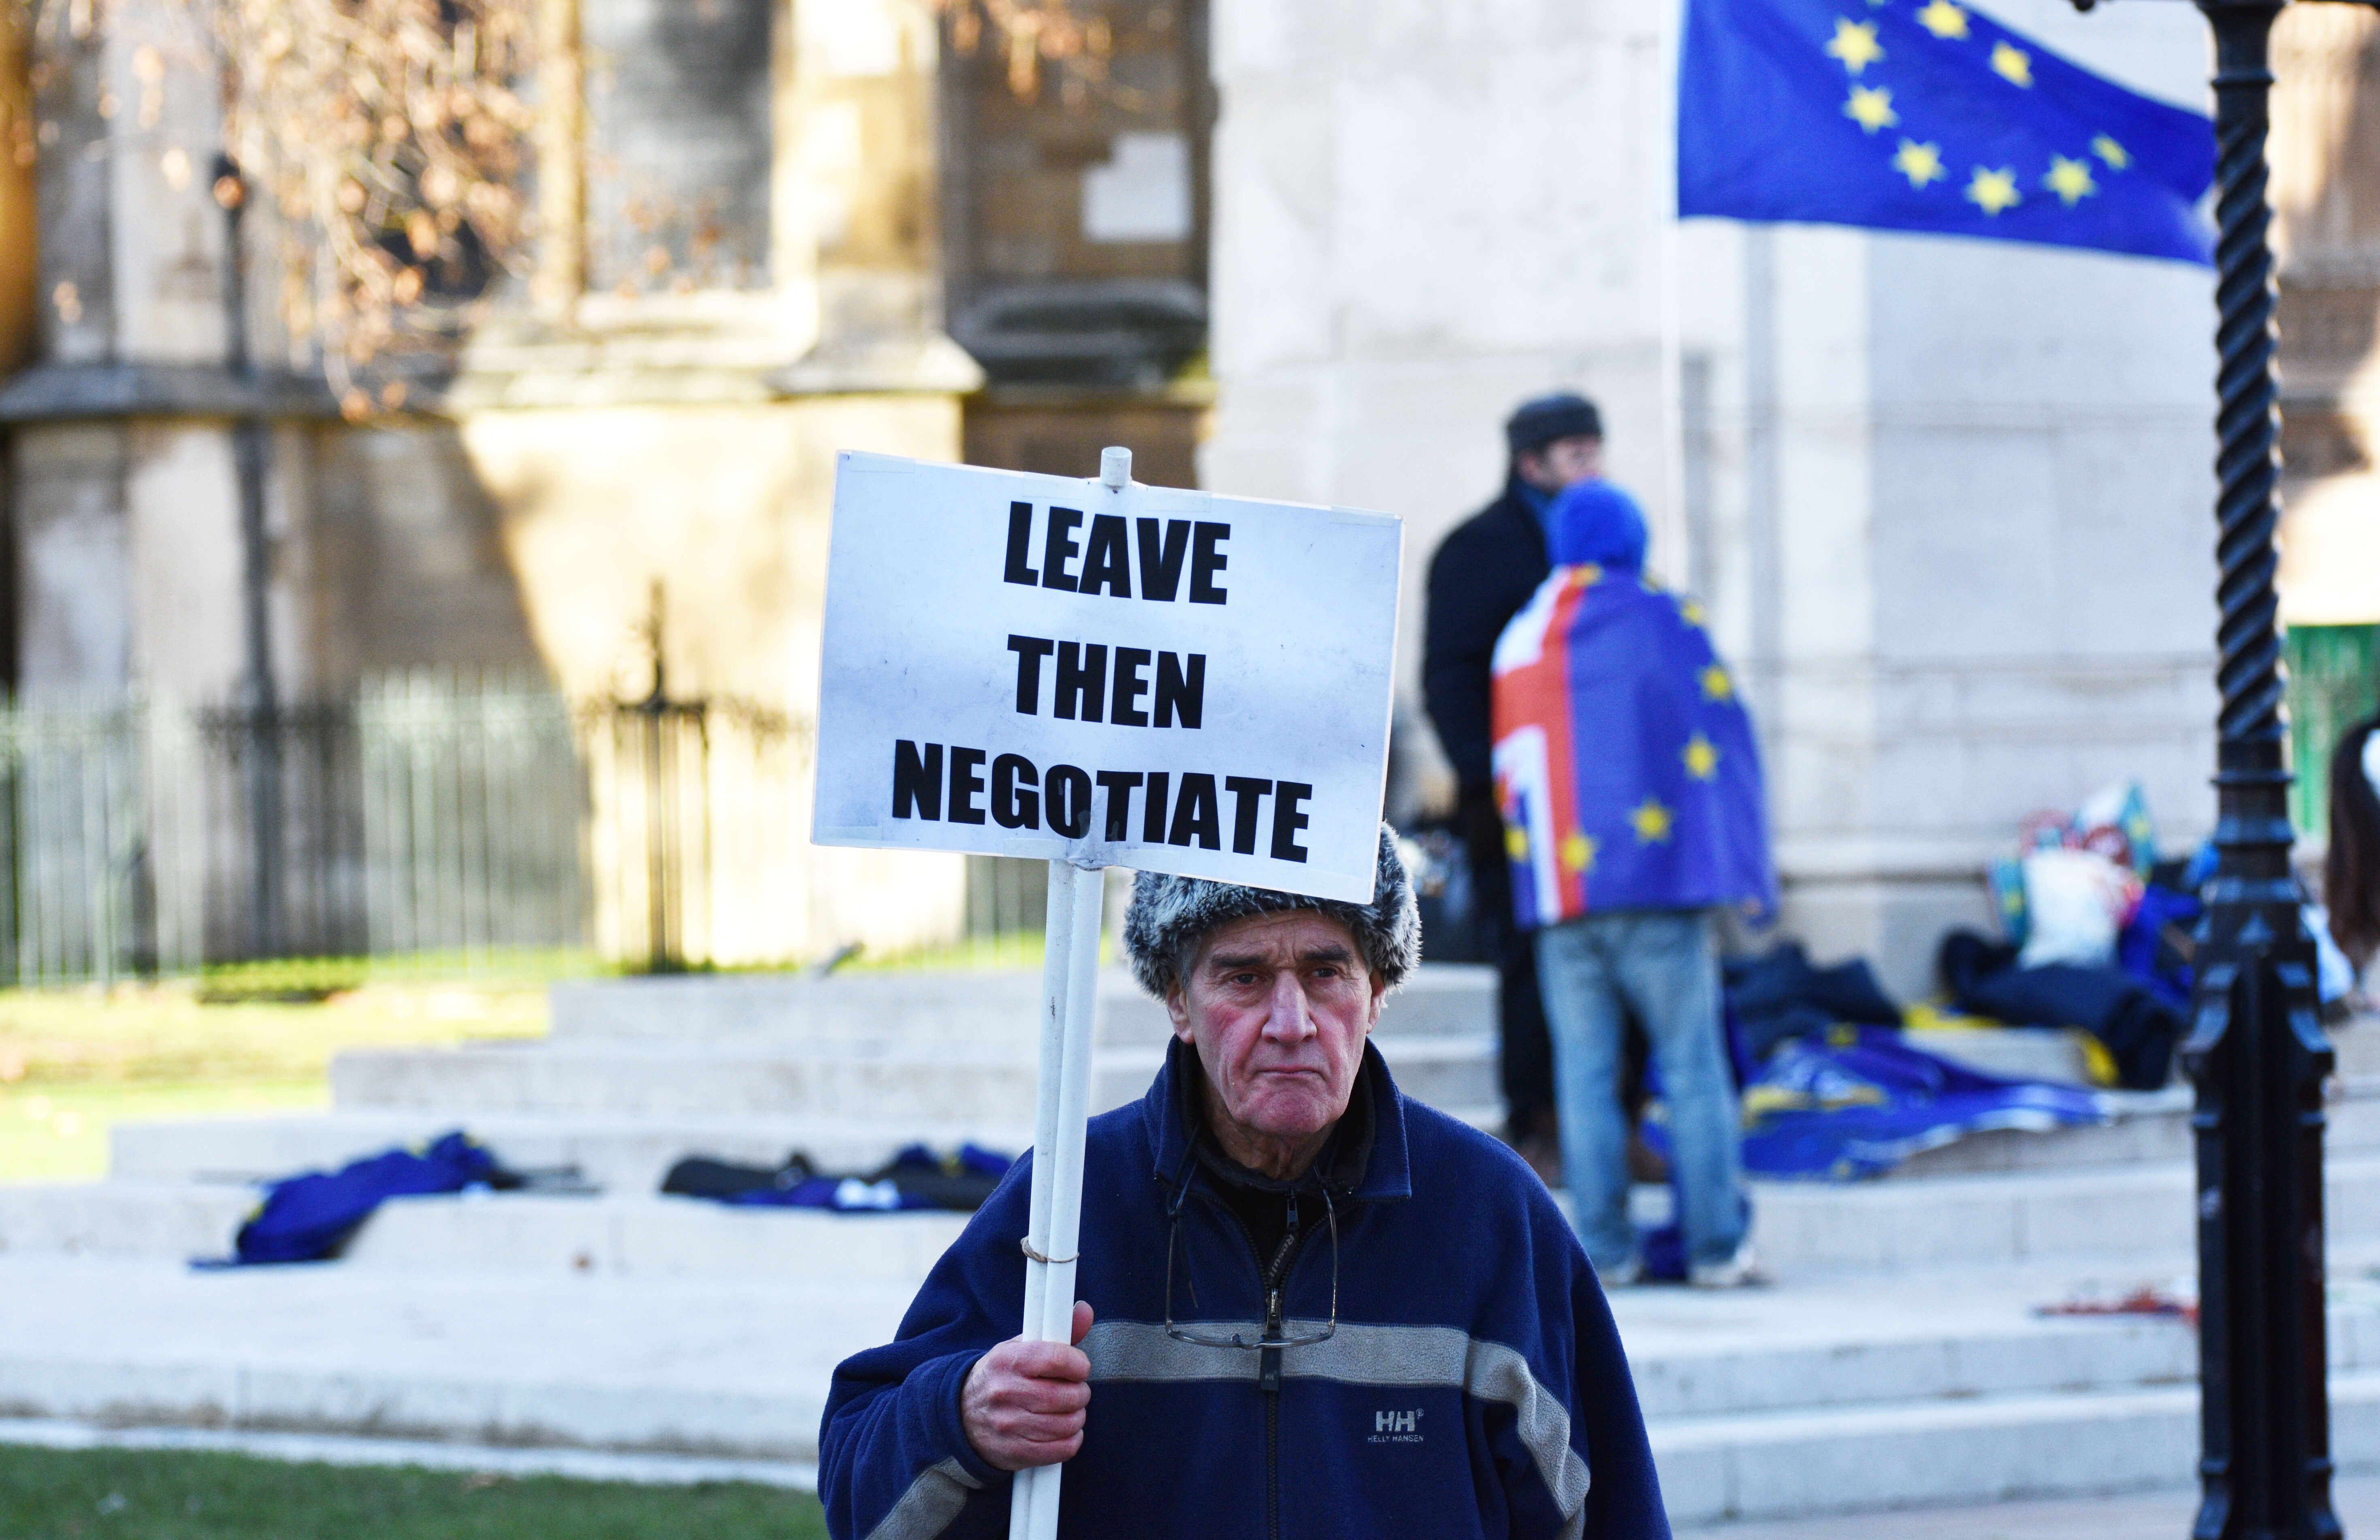 A pro Brexit protestor - for the UK 'crashing out' of the European Union without a deal